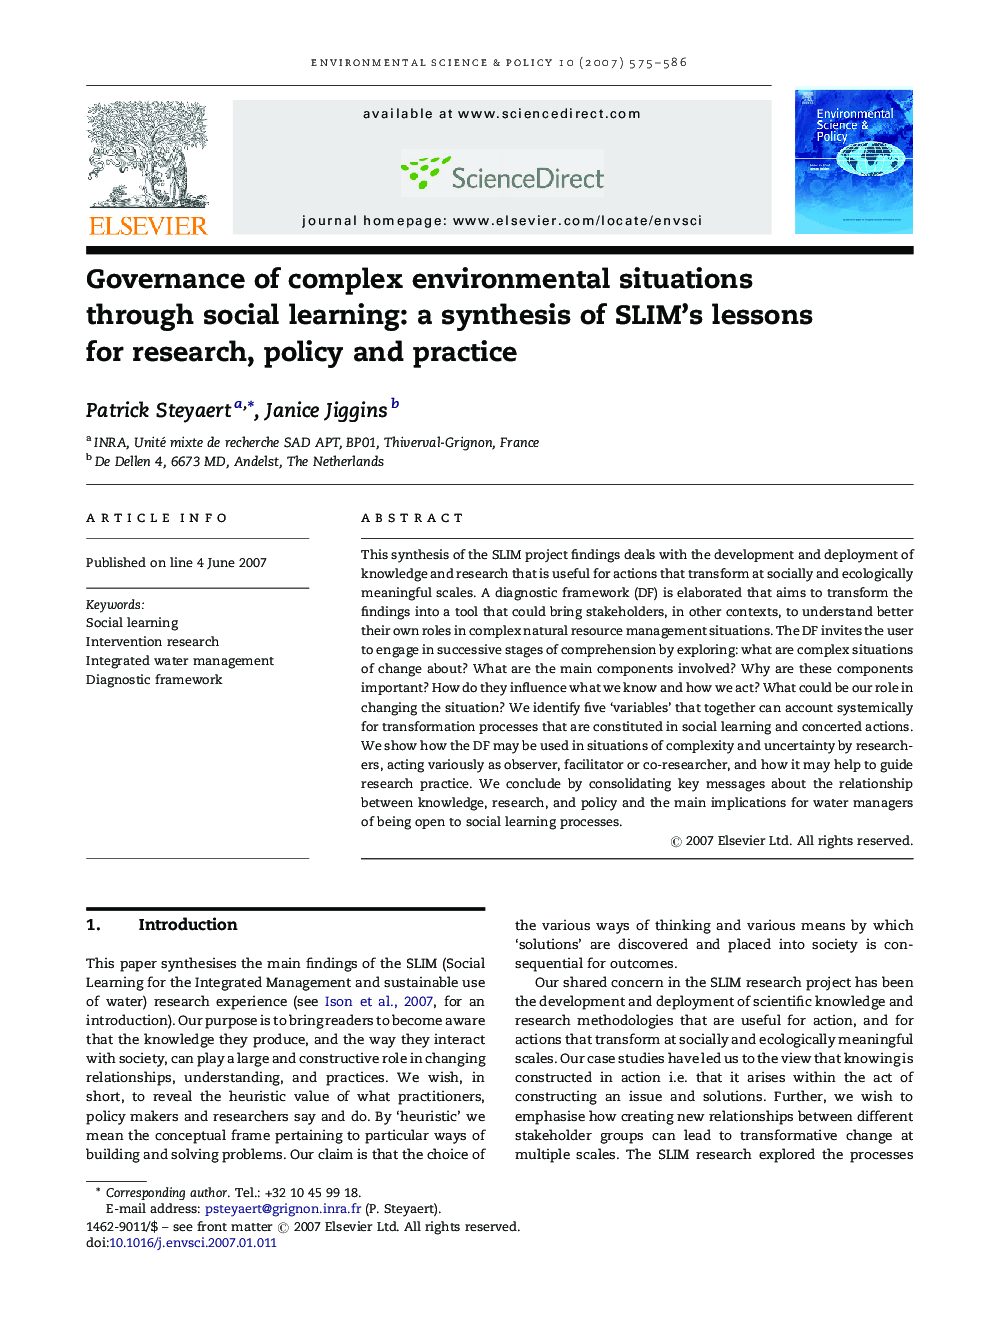 Governance of complex environmental situations through social learning: a synthesis of SLIM's lessons for research, policy and practice